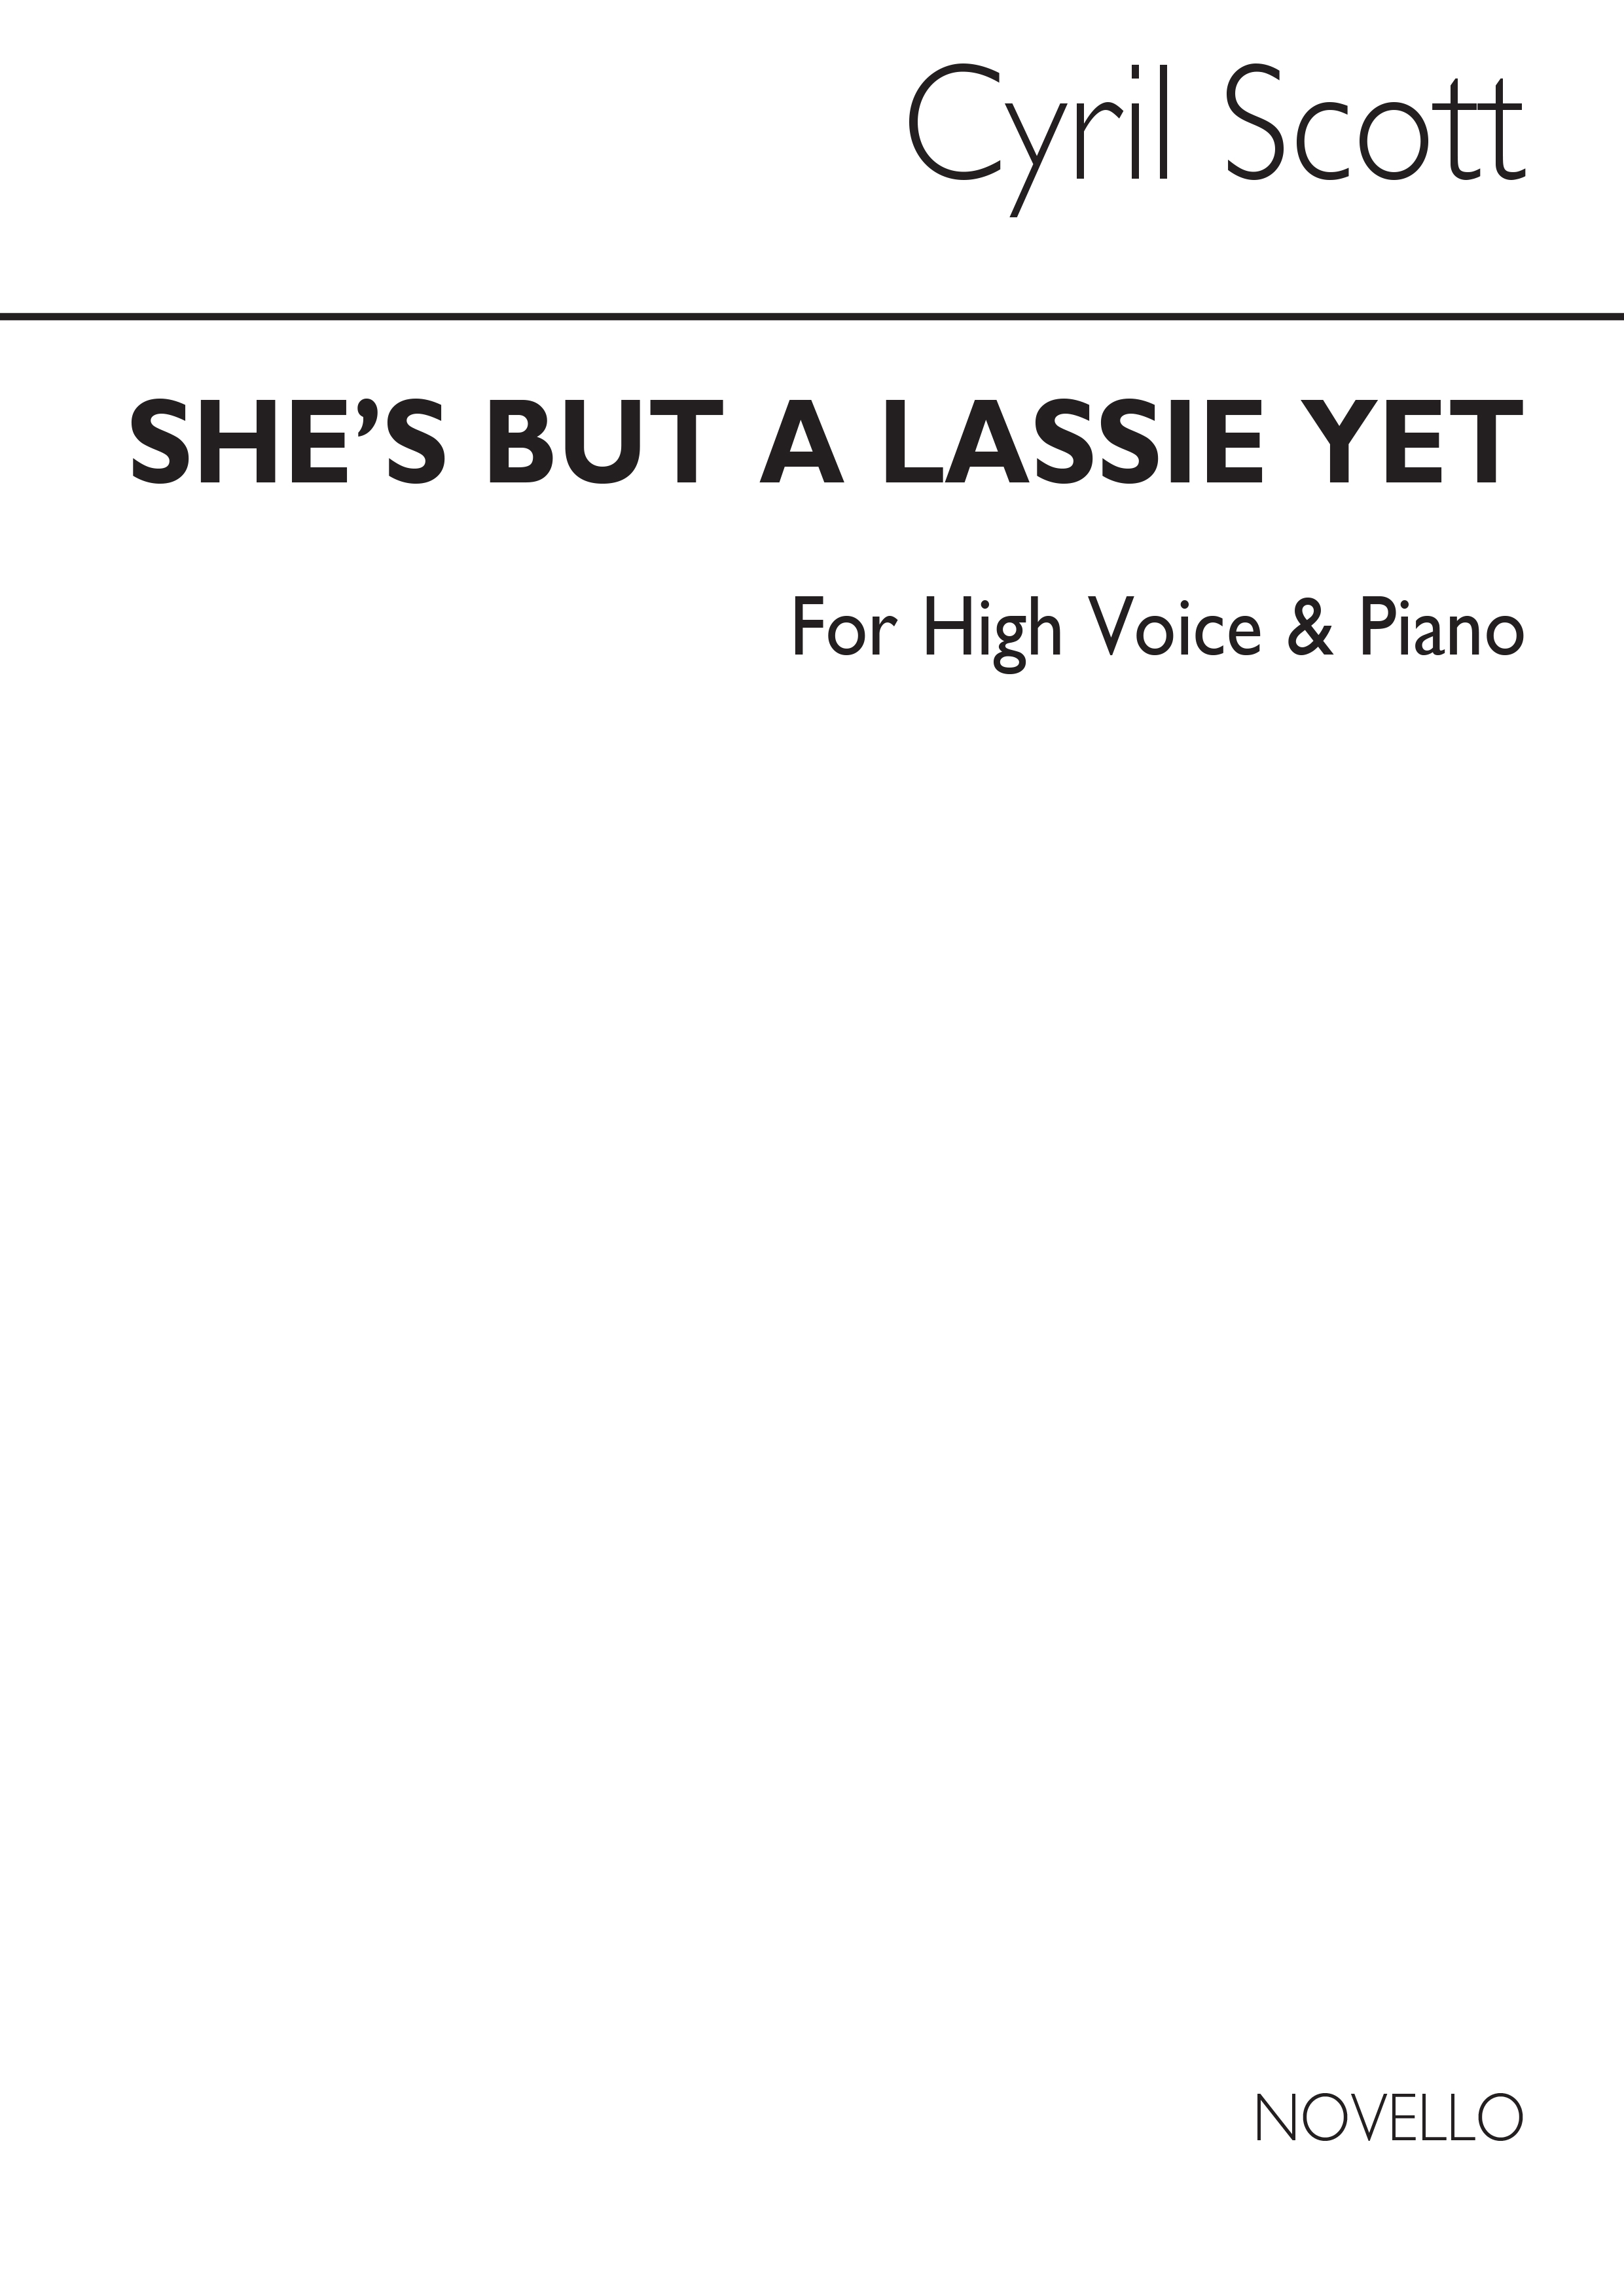 Cyril Scott: She's But A Lassie Yet-high Voice/Piano (Key-f): High Voice: Vocal